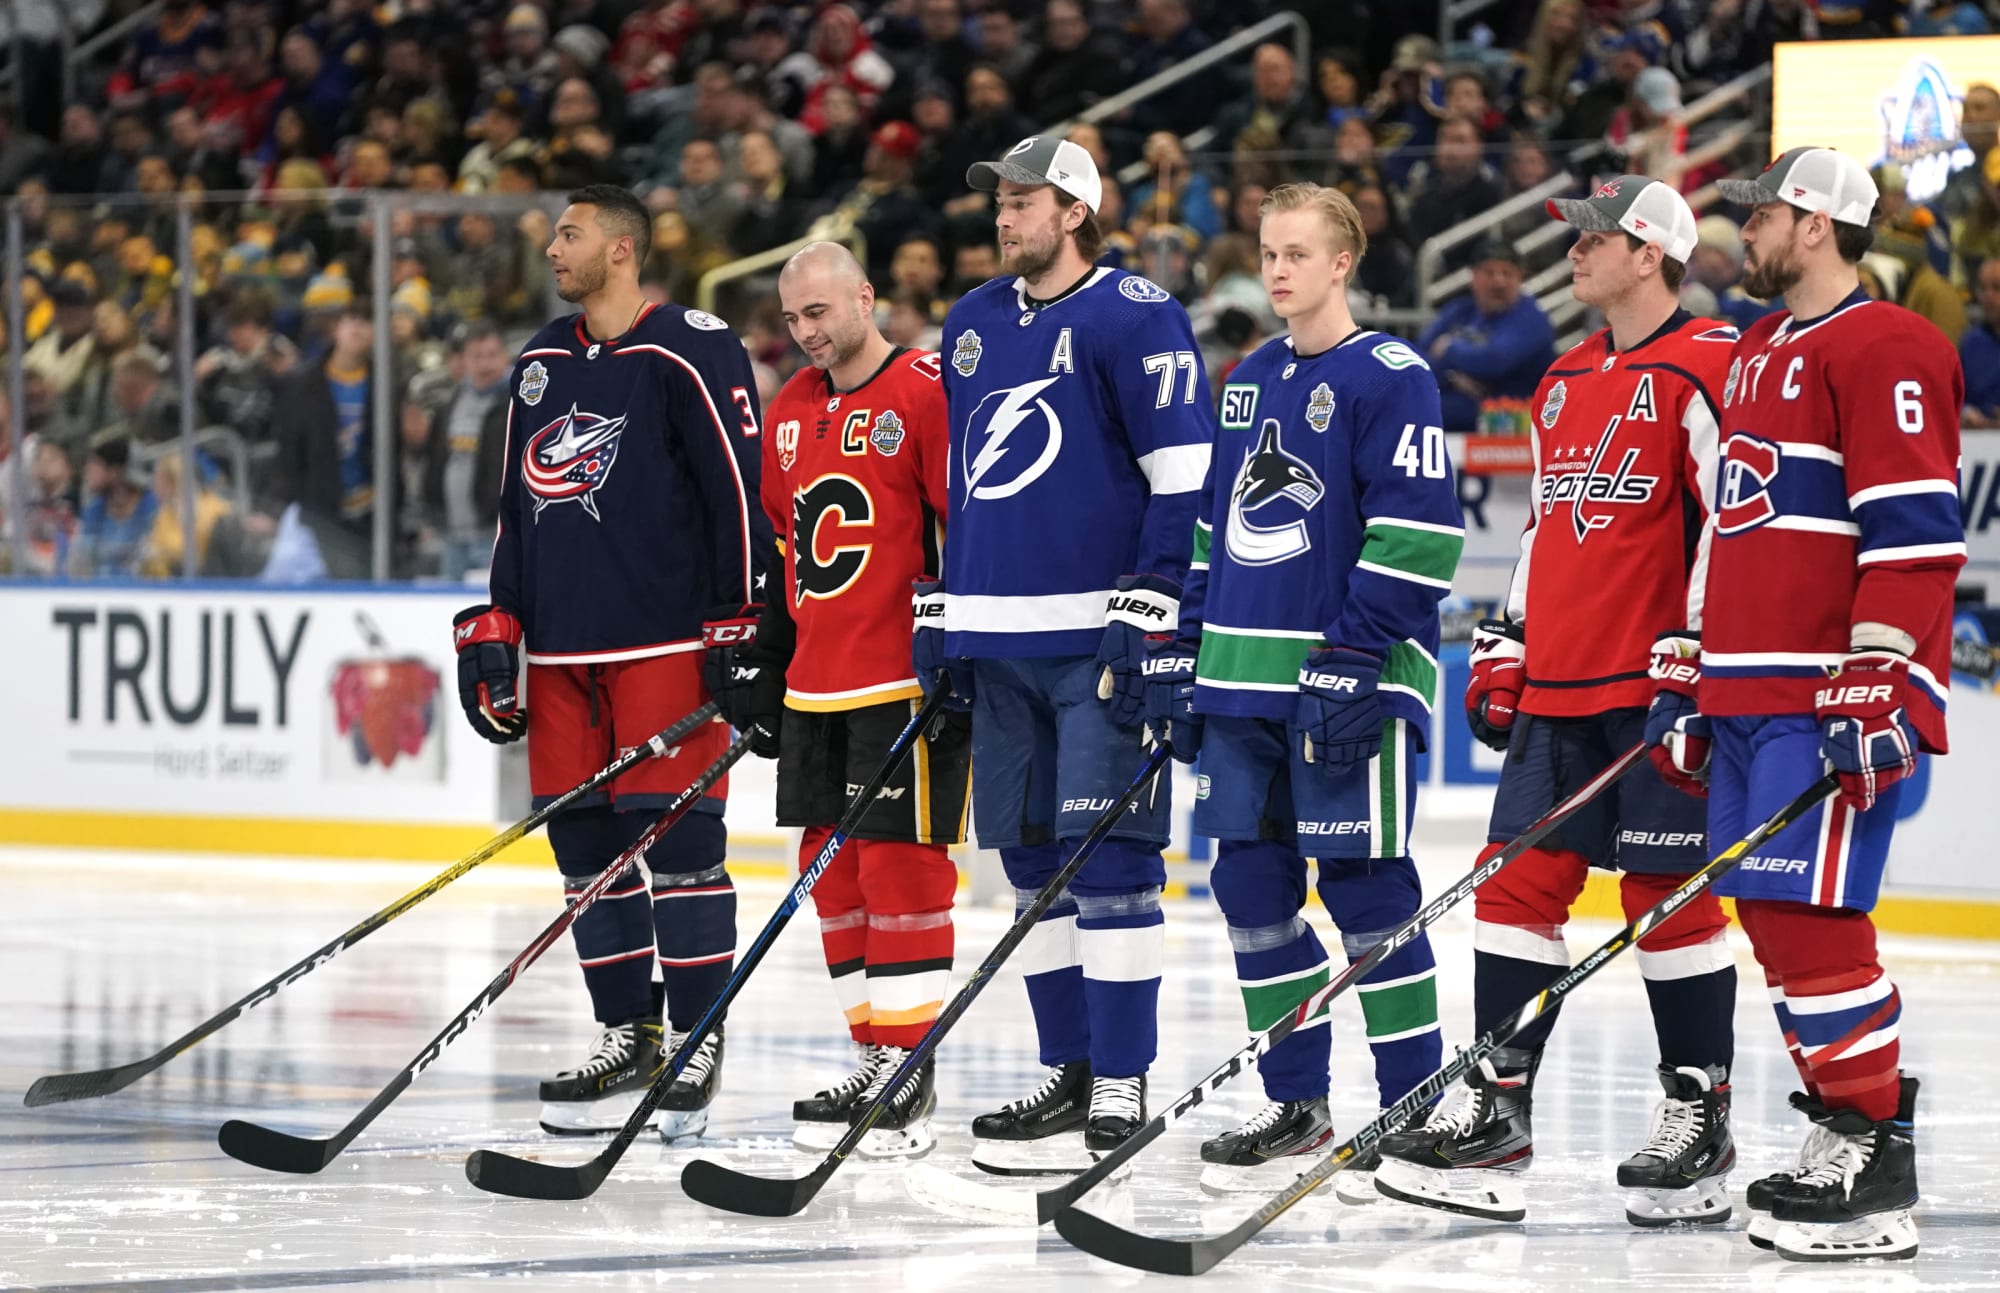 2020 NHL All-Star Game Rosters, TV channel, live stream, predictions